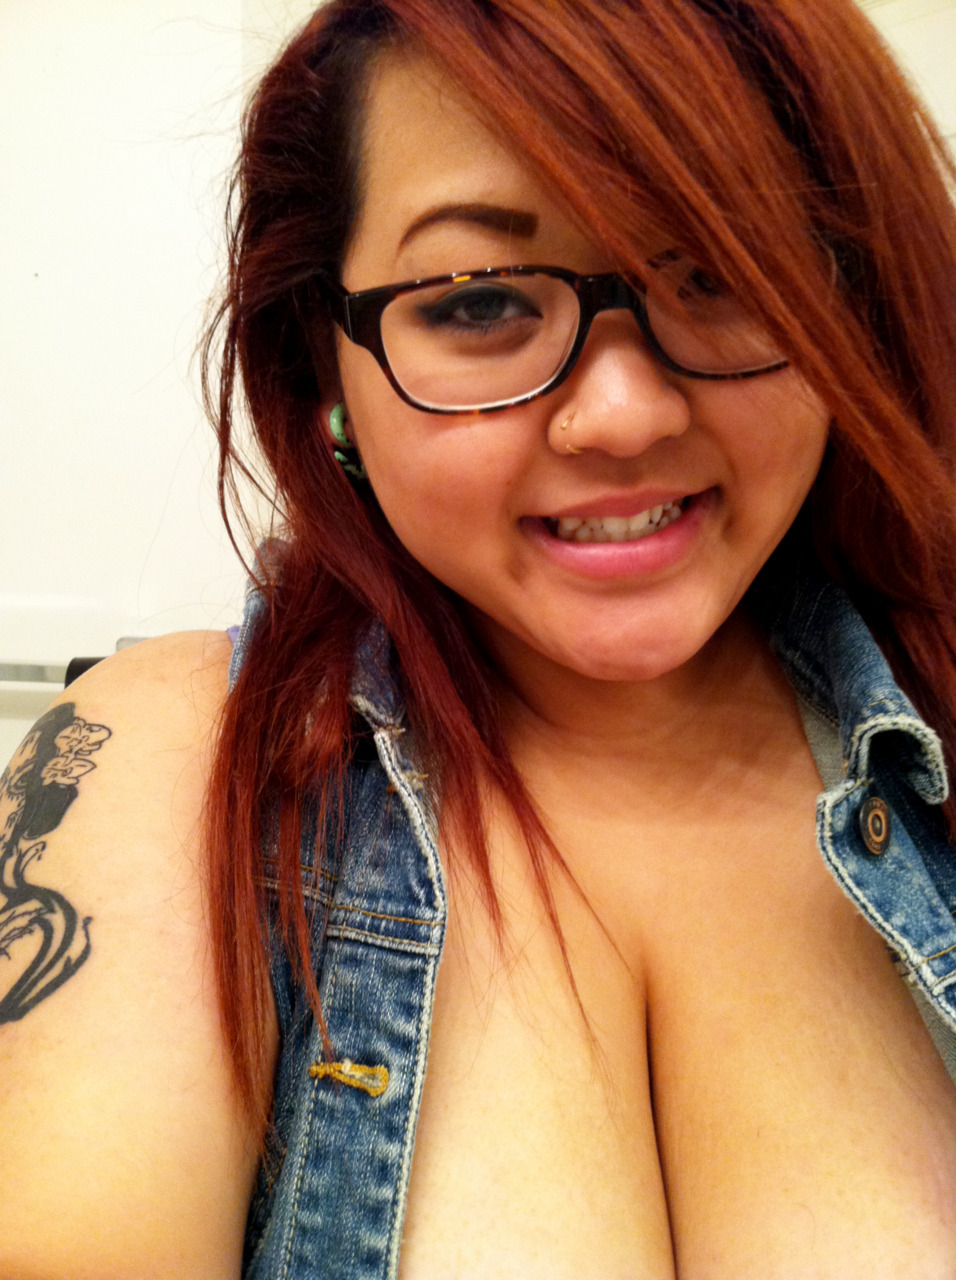 Thisisroy – Ohreinababyy – What A Ginger – Damn Gingers Wit Their Cute Asian Faces Impeccable Curves Mesmerizing Eyes An…1